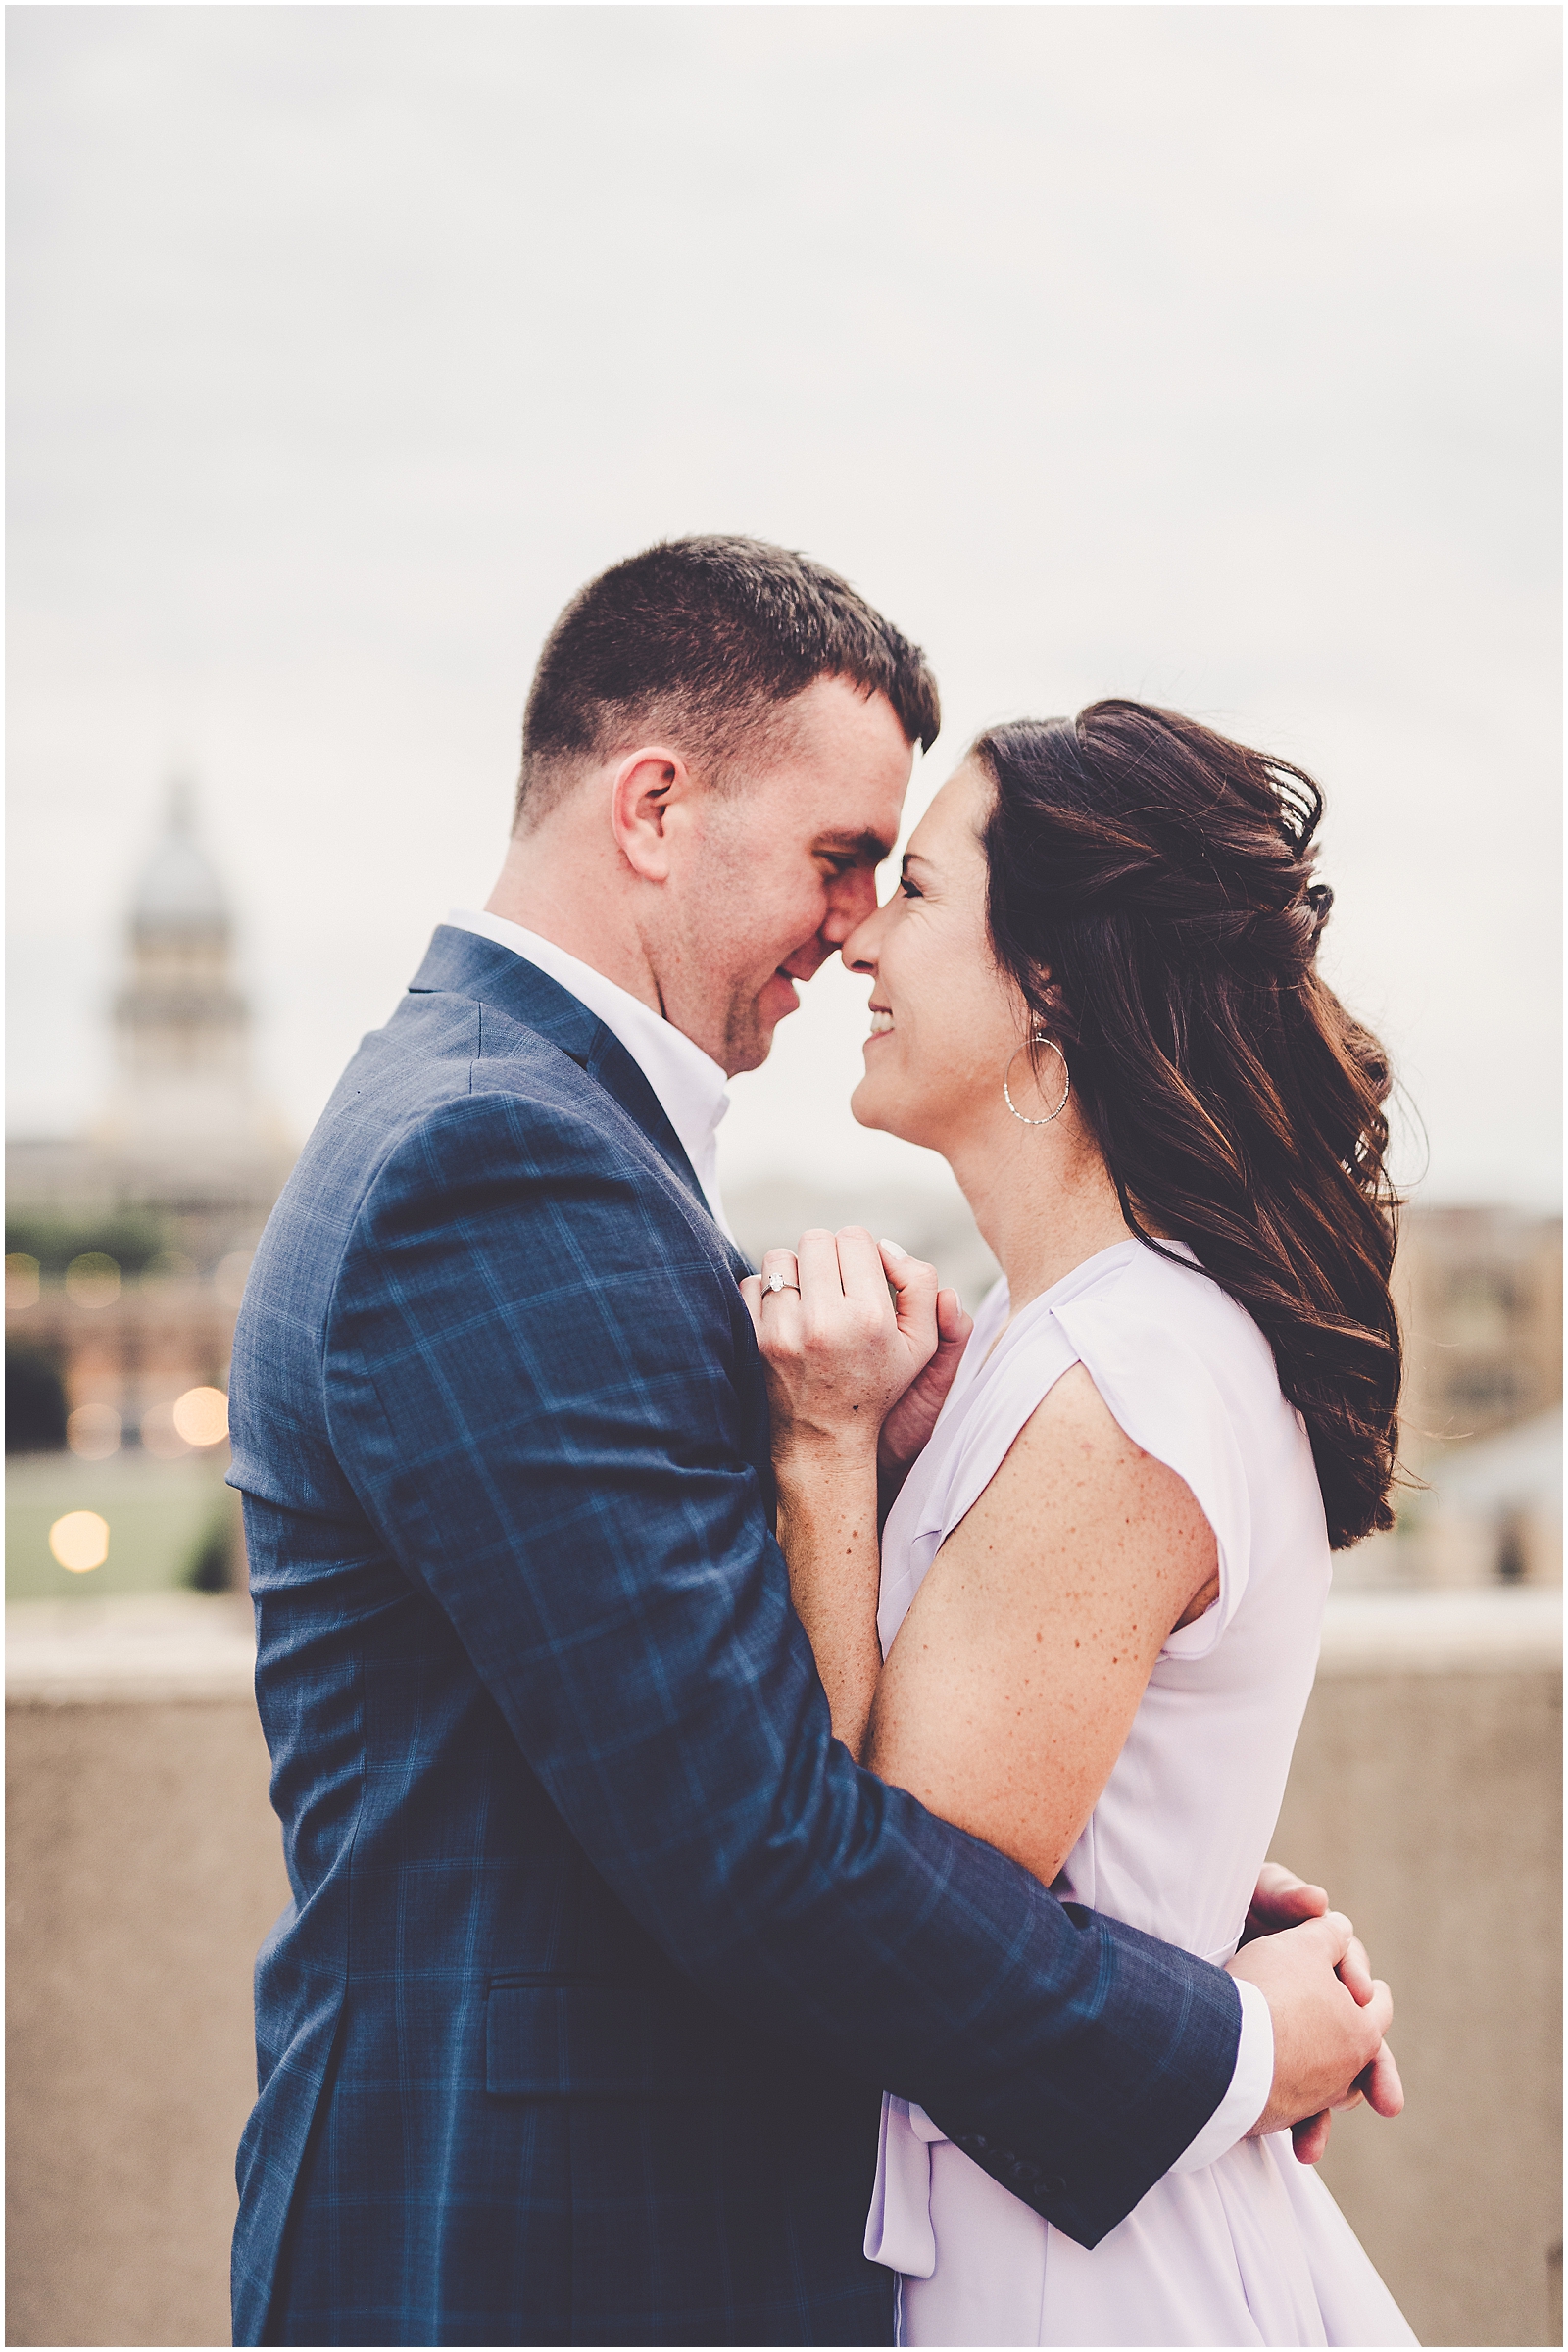 Allye & Grant's downtown engagement session in Springfield, Illinois with Chicagoland wedding photographer Kara Evans Photographer.